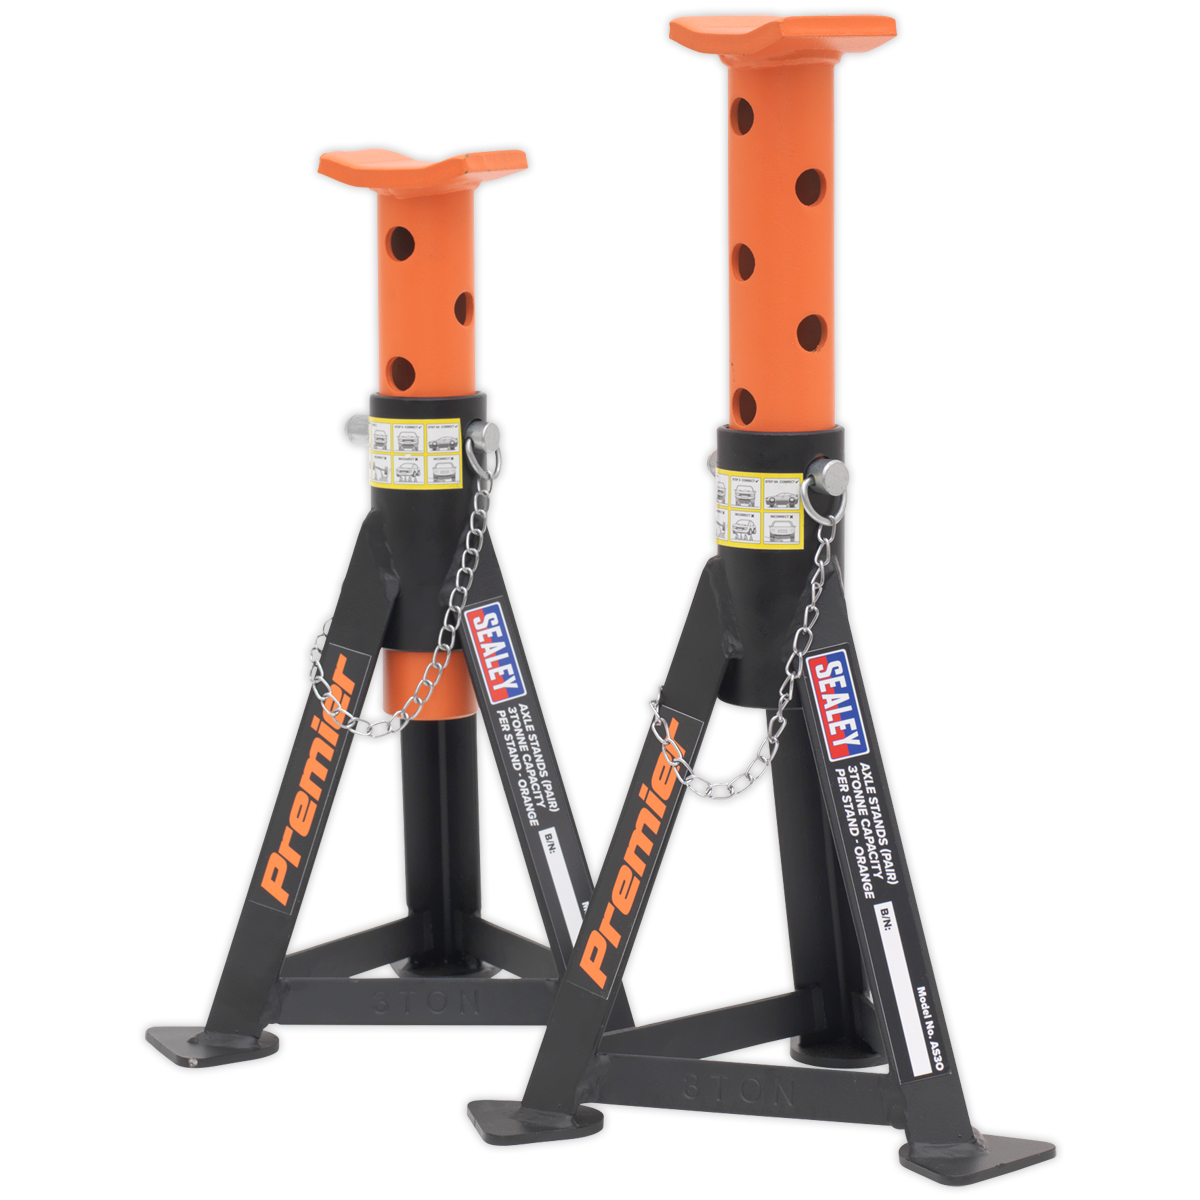 SEALEY - AS3O Axle Stands (Pair) 3tonne Capacity per Stand - Orange